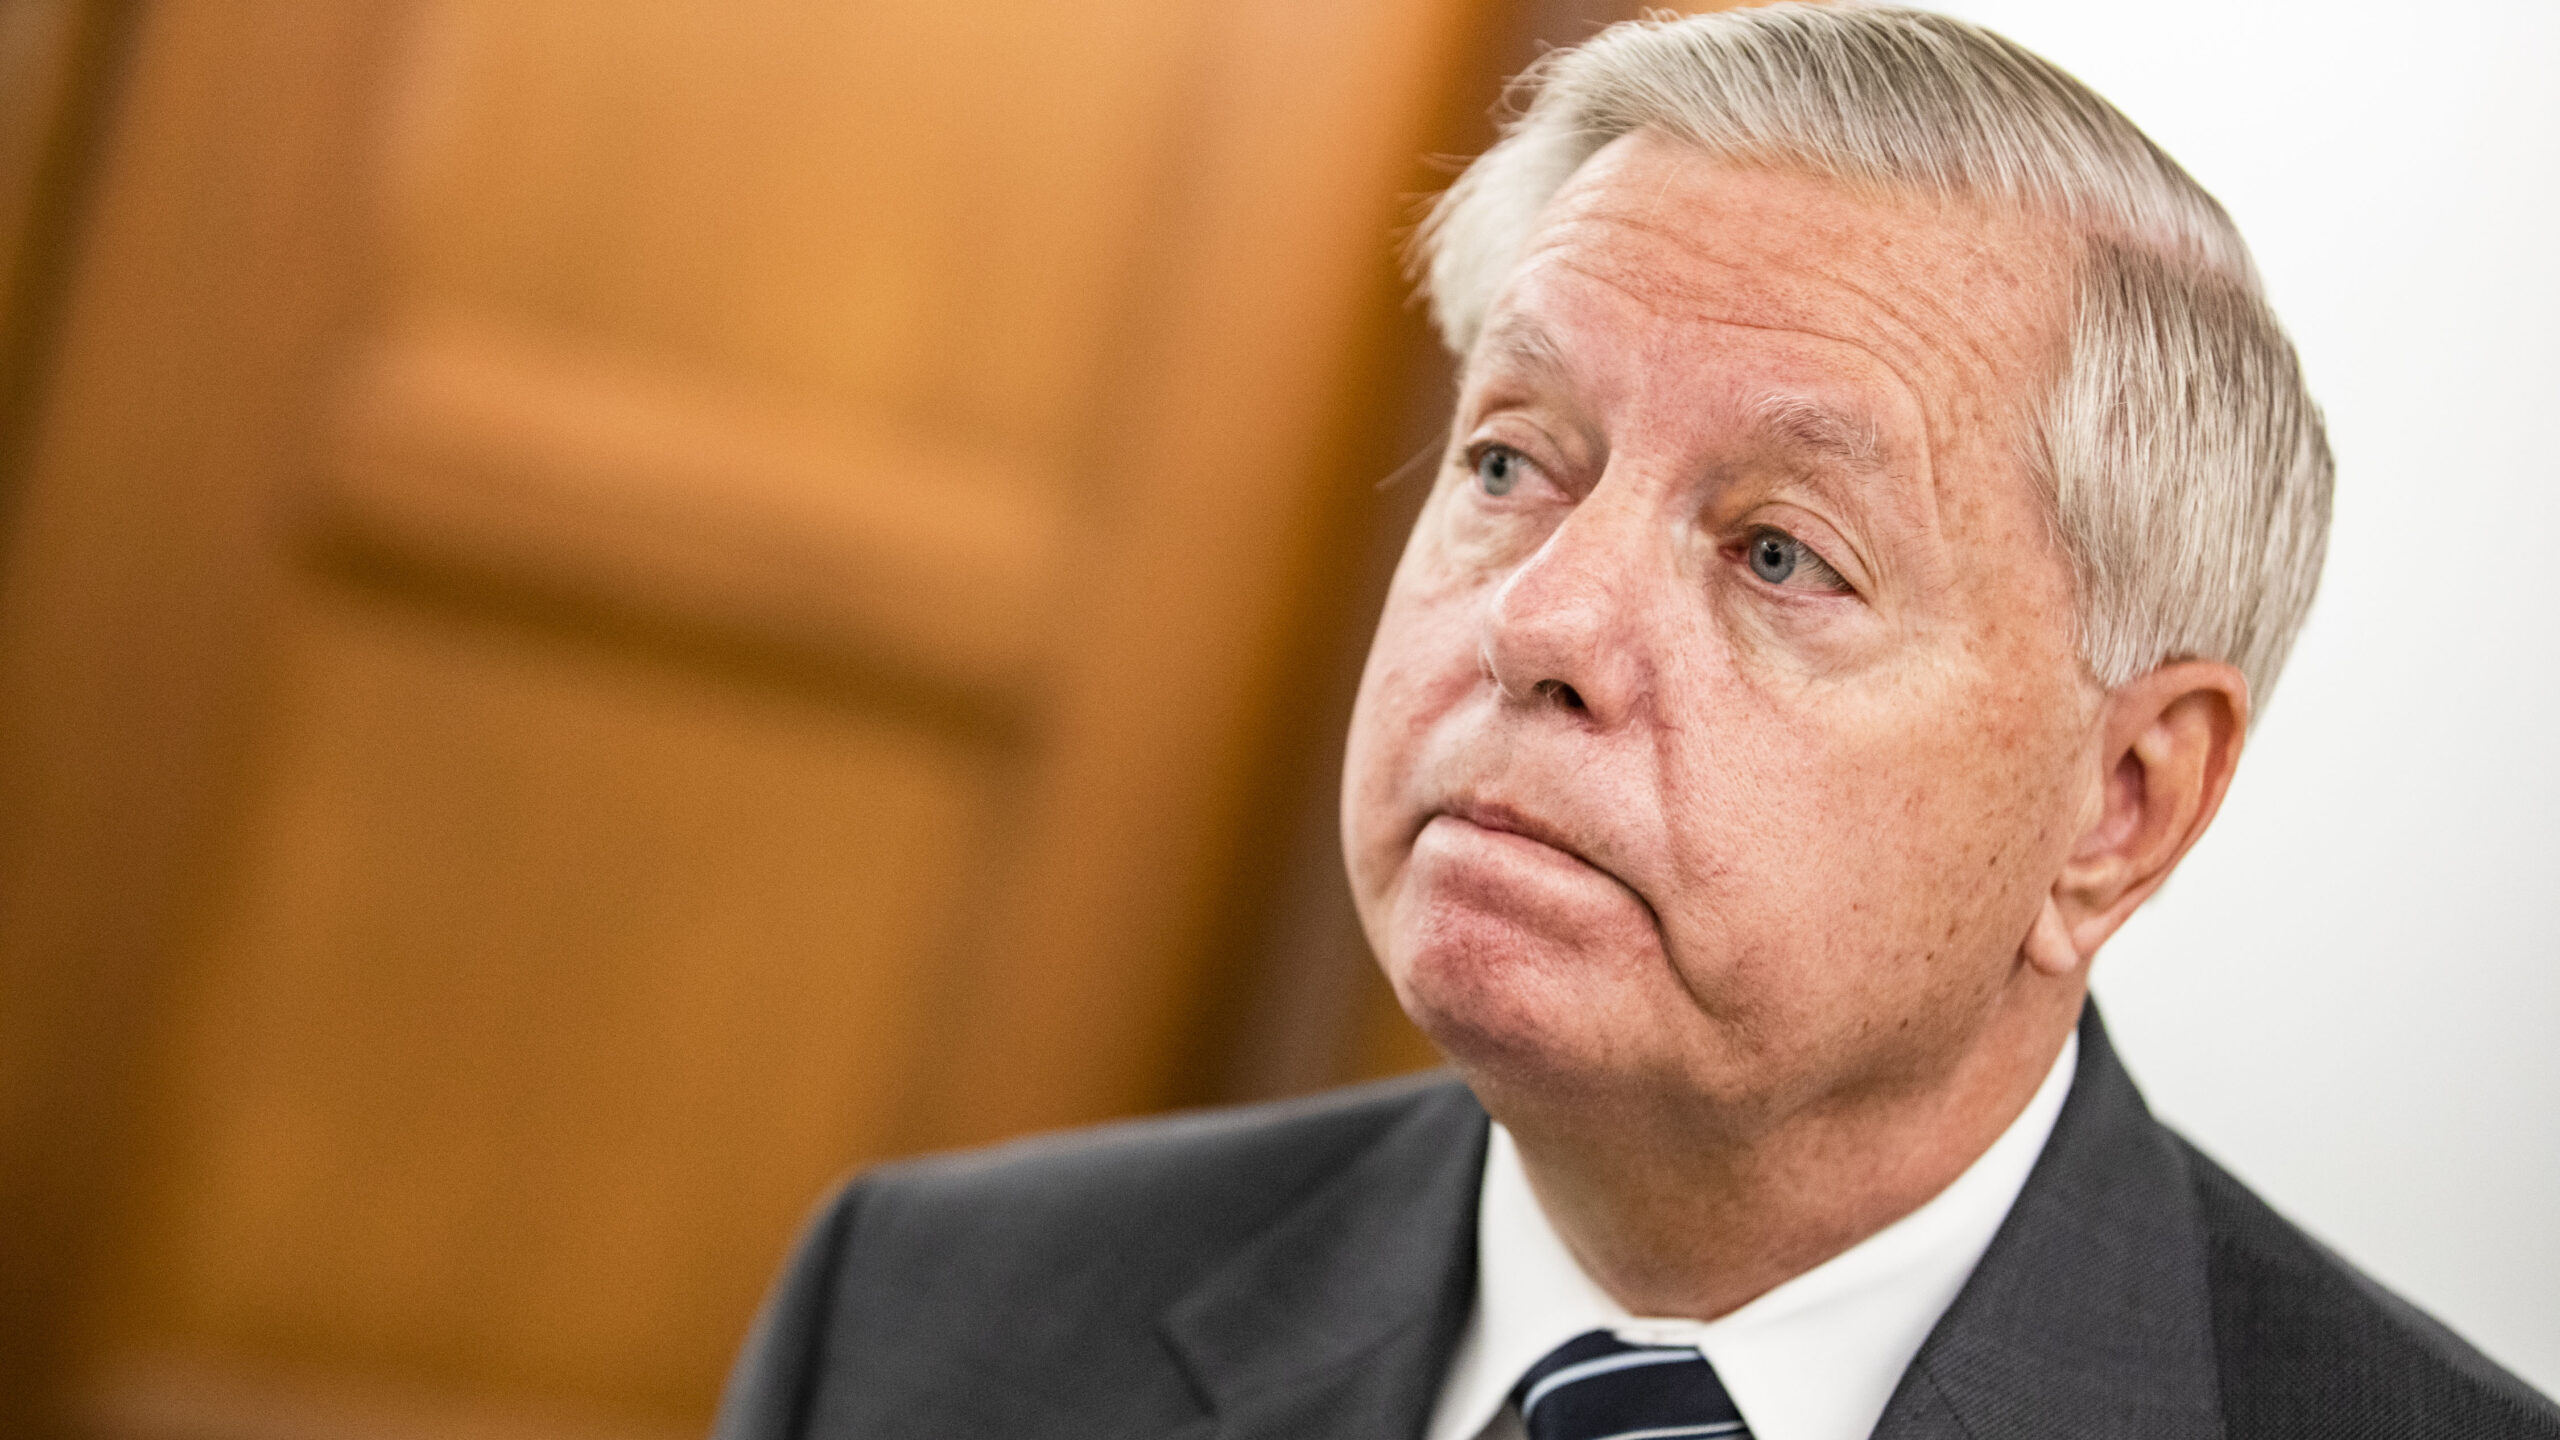 Senate Ethics Committee Publicly Blasts Lindsey Graham For Repeatedly Violating Fundraising Rules